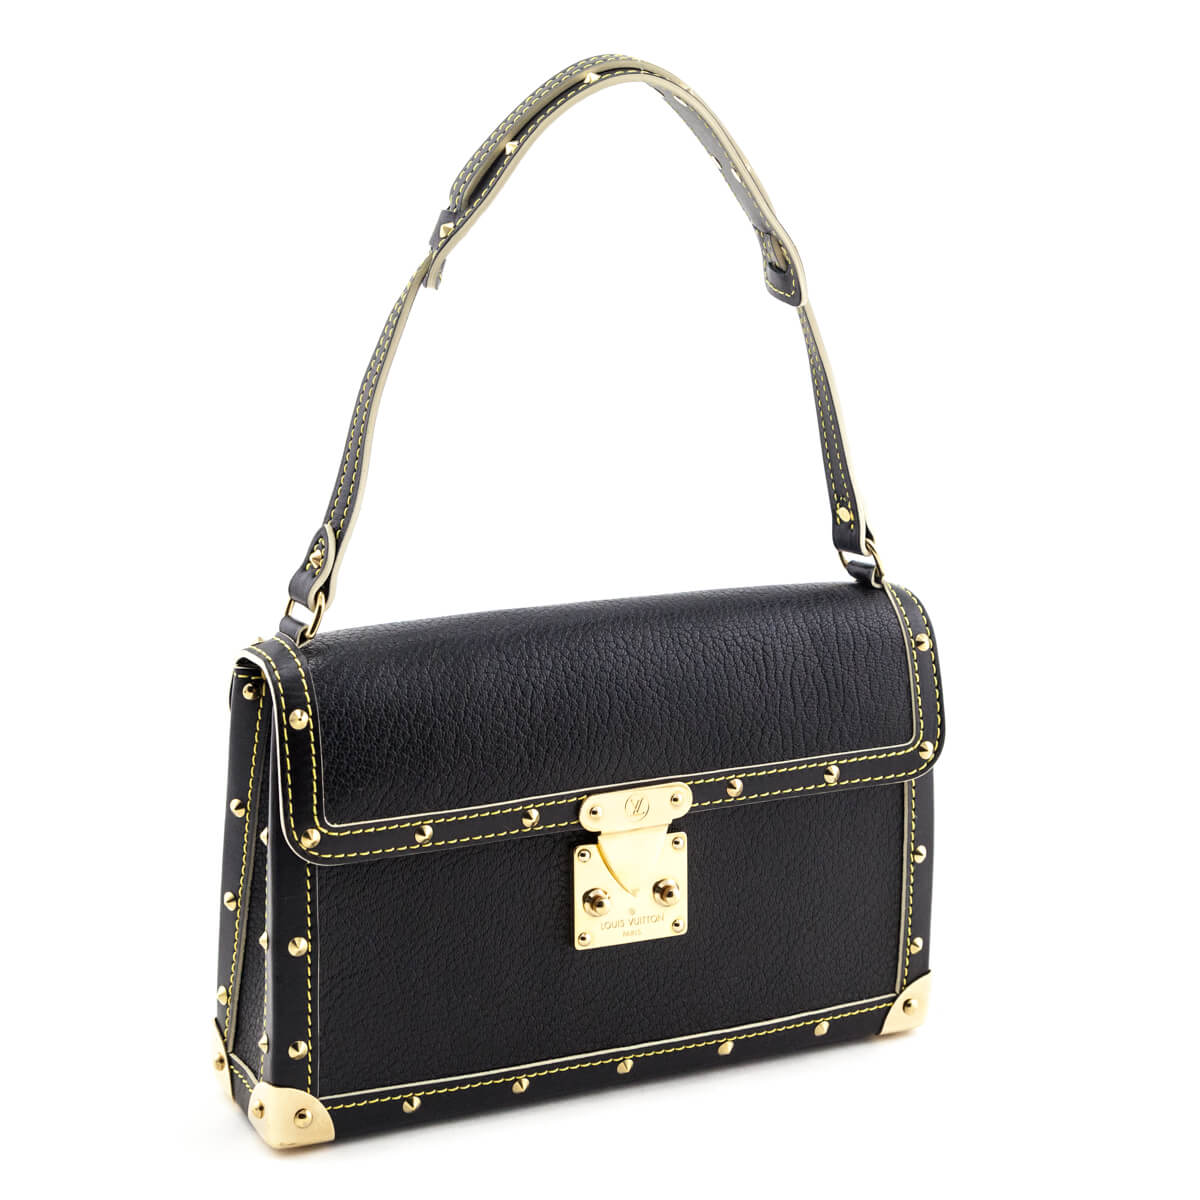 Louis Vuitton Black Suhali L'Aimable Bag - Love that Bag etc - Preowned Authentic Designer Handbags & Preloved Fashions